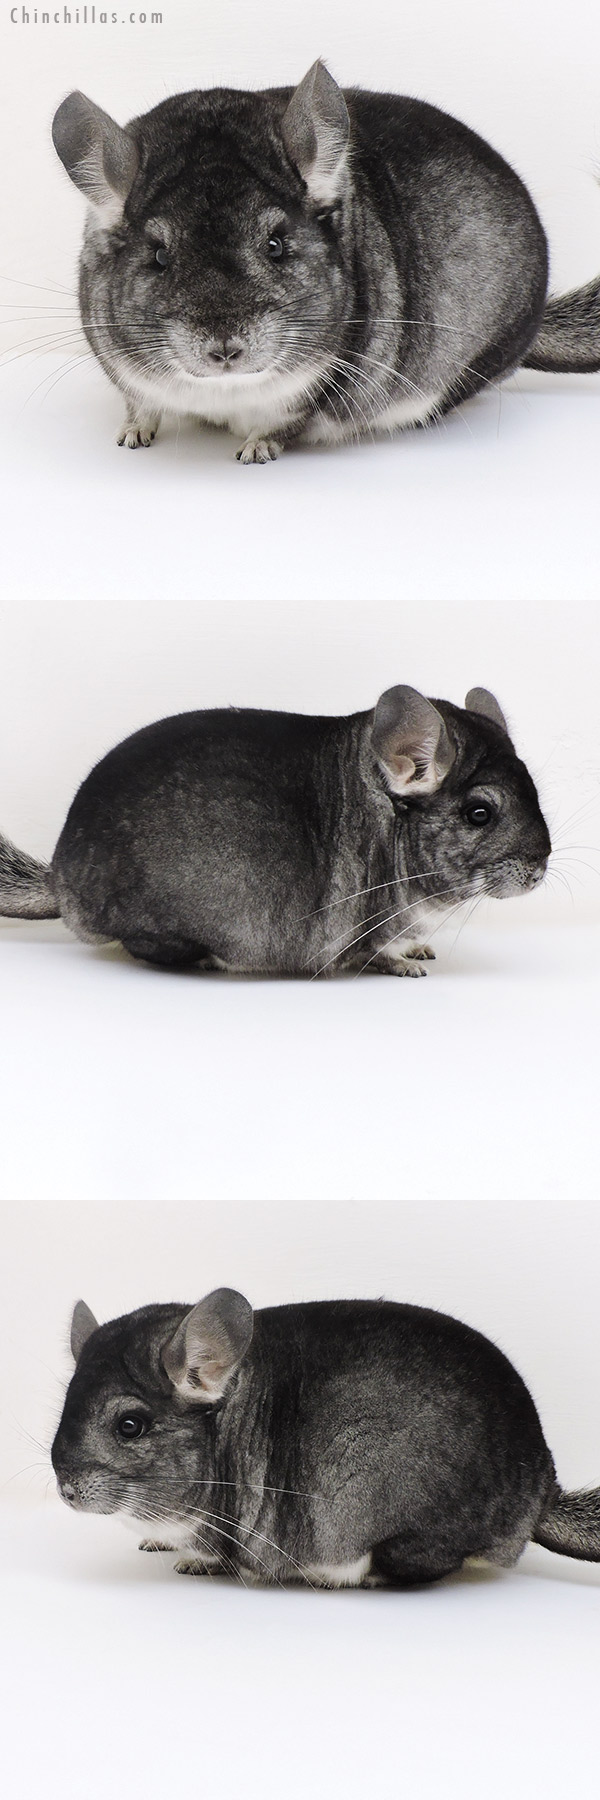 Chinchilla or related item offered for sale or export on Chinchillas.com - 17131 Large Blocky Herd Improvement Quality Standard Male Chinchilla